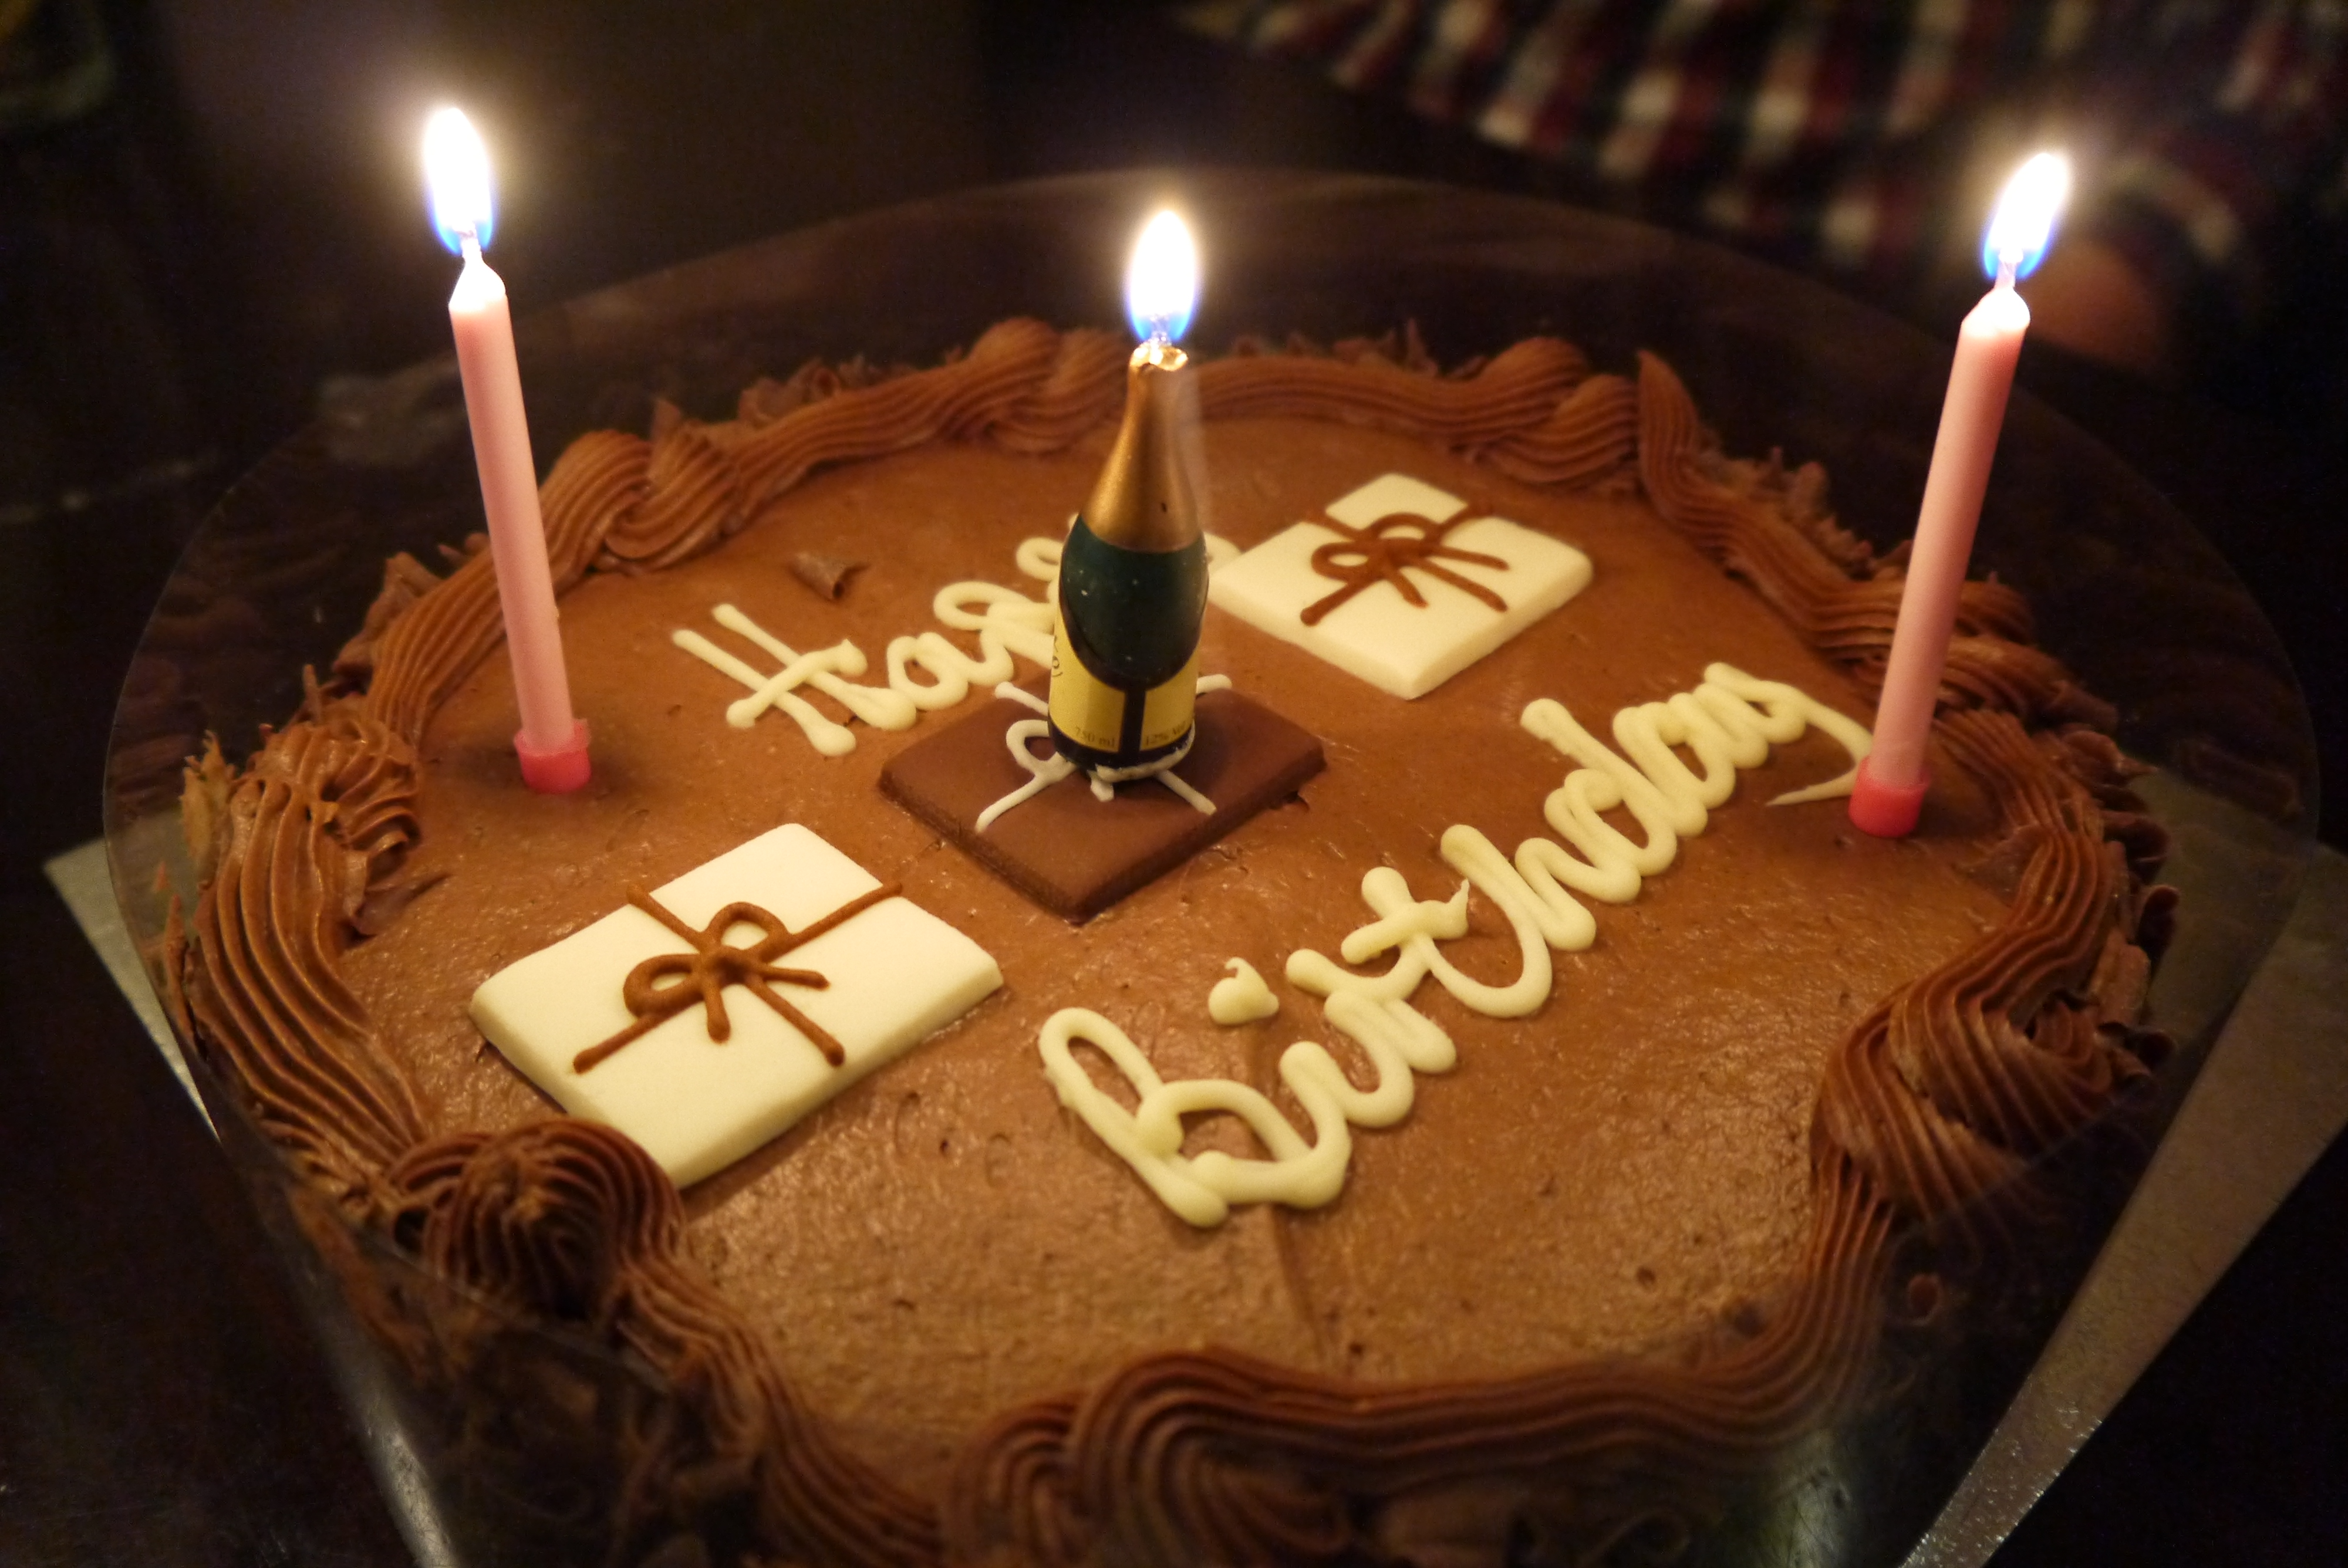 http://pcwallart.com/happy-birthday-chocolate-cake-with-candles-wallpaper-3.html